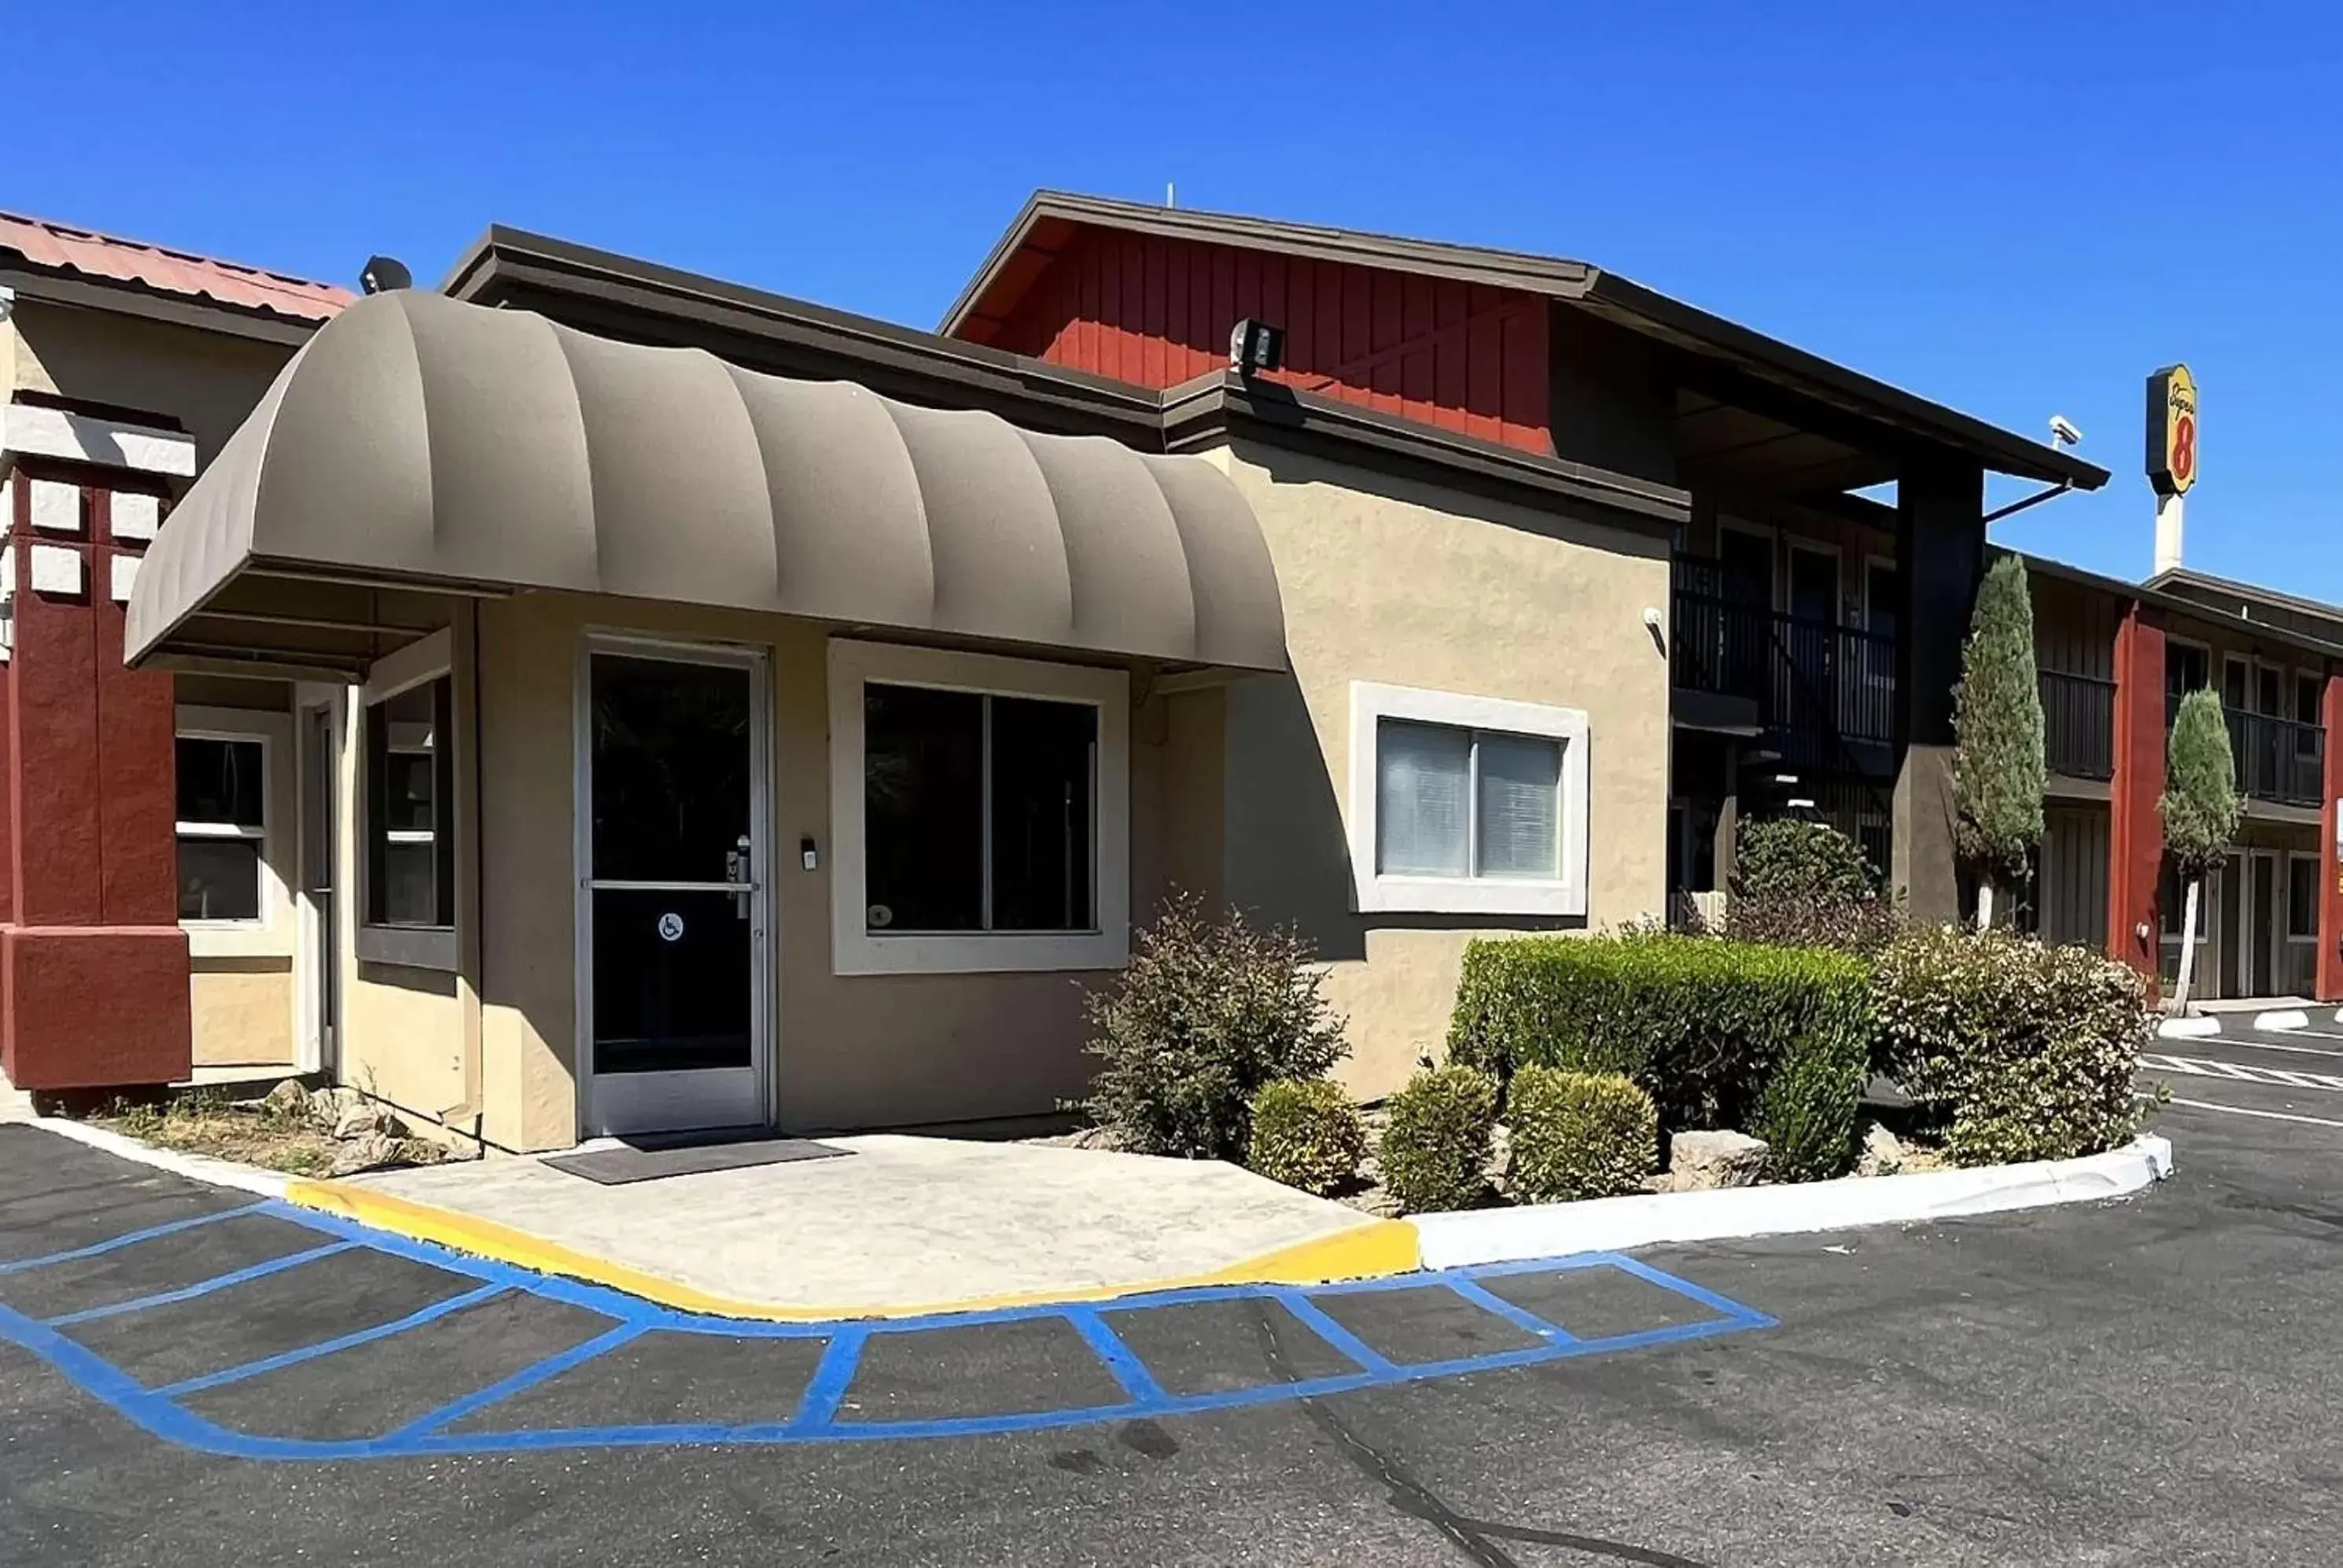 Property Building in Super 8 by Wyndham Red Bluff